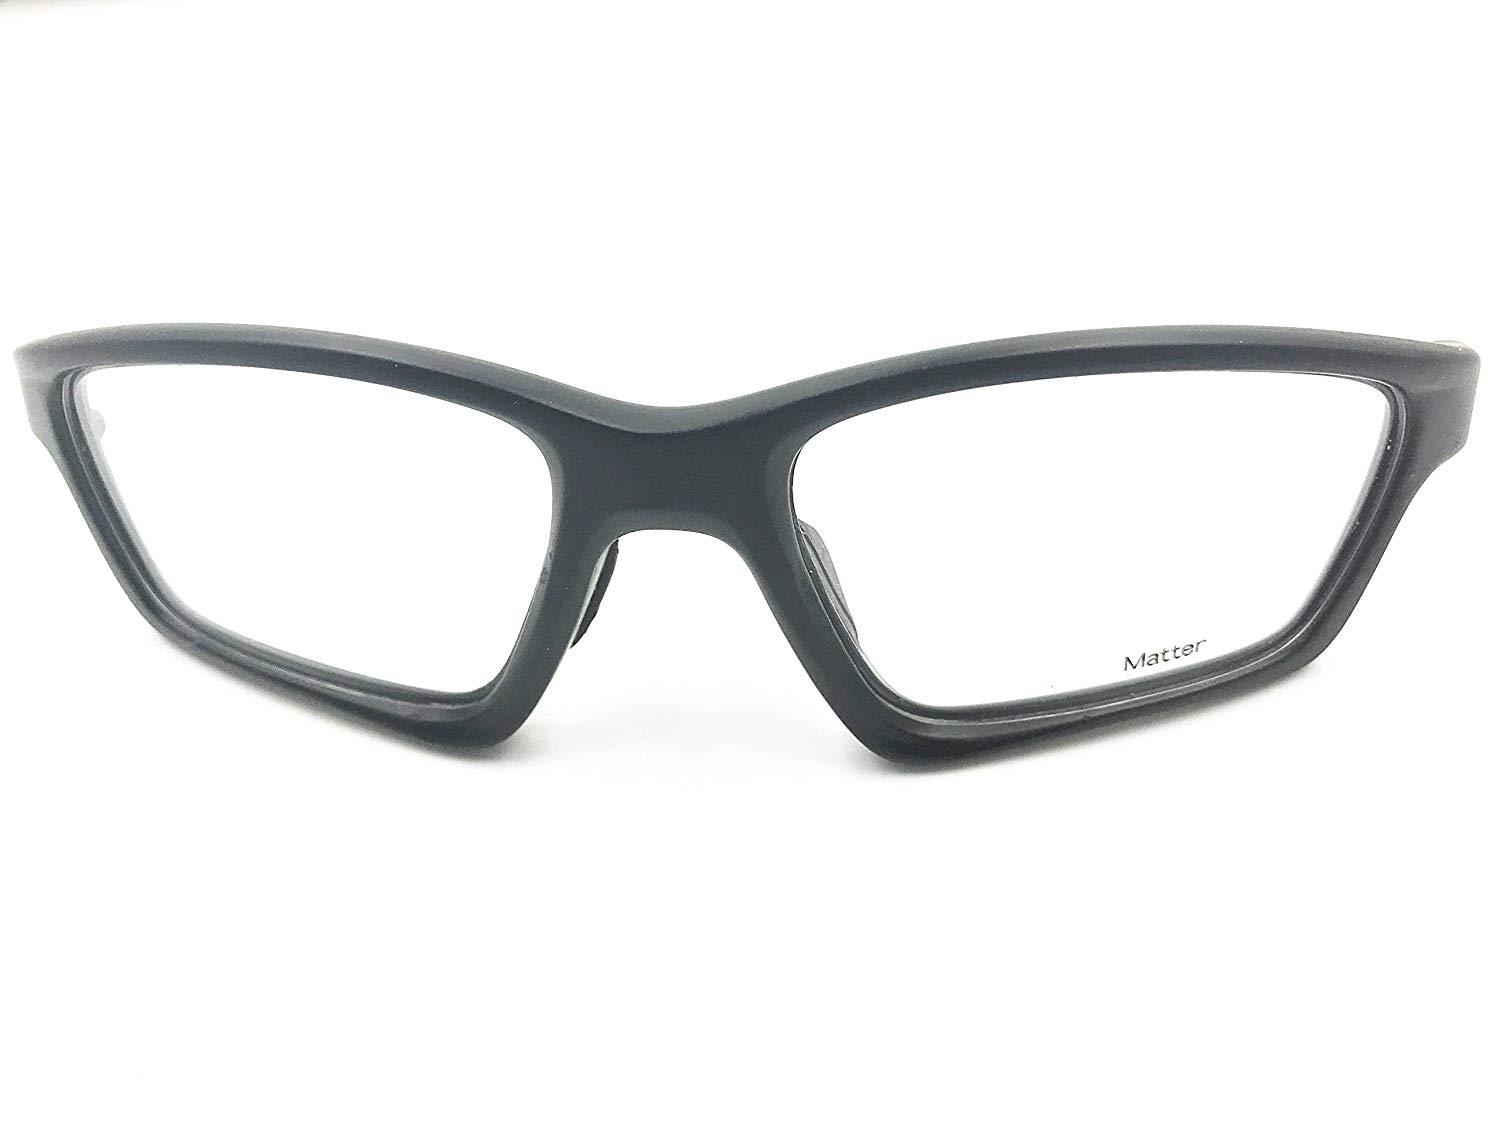 Replacement Eye Frame for Crosslink Sweep OX8031 Glass wo Temples 55mm - $69.98